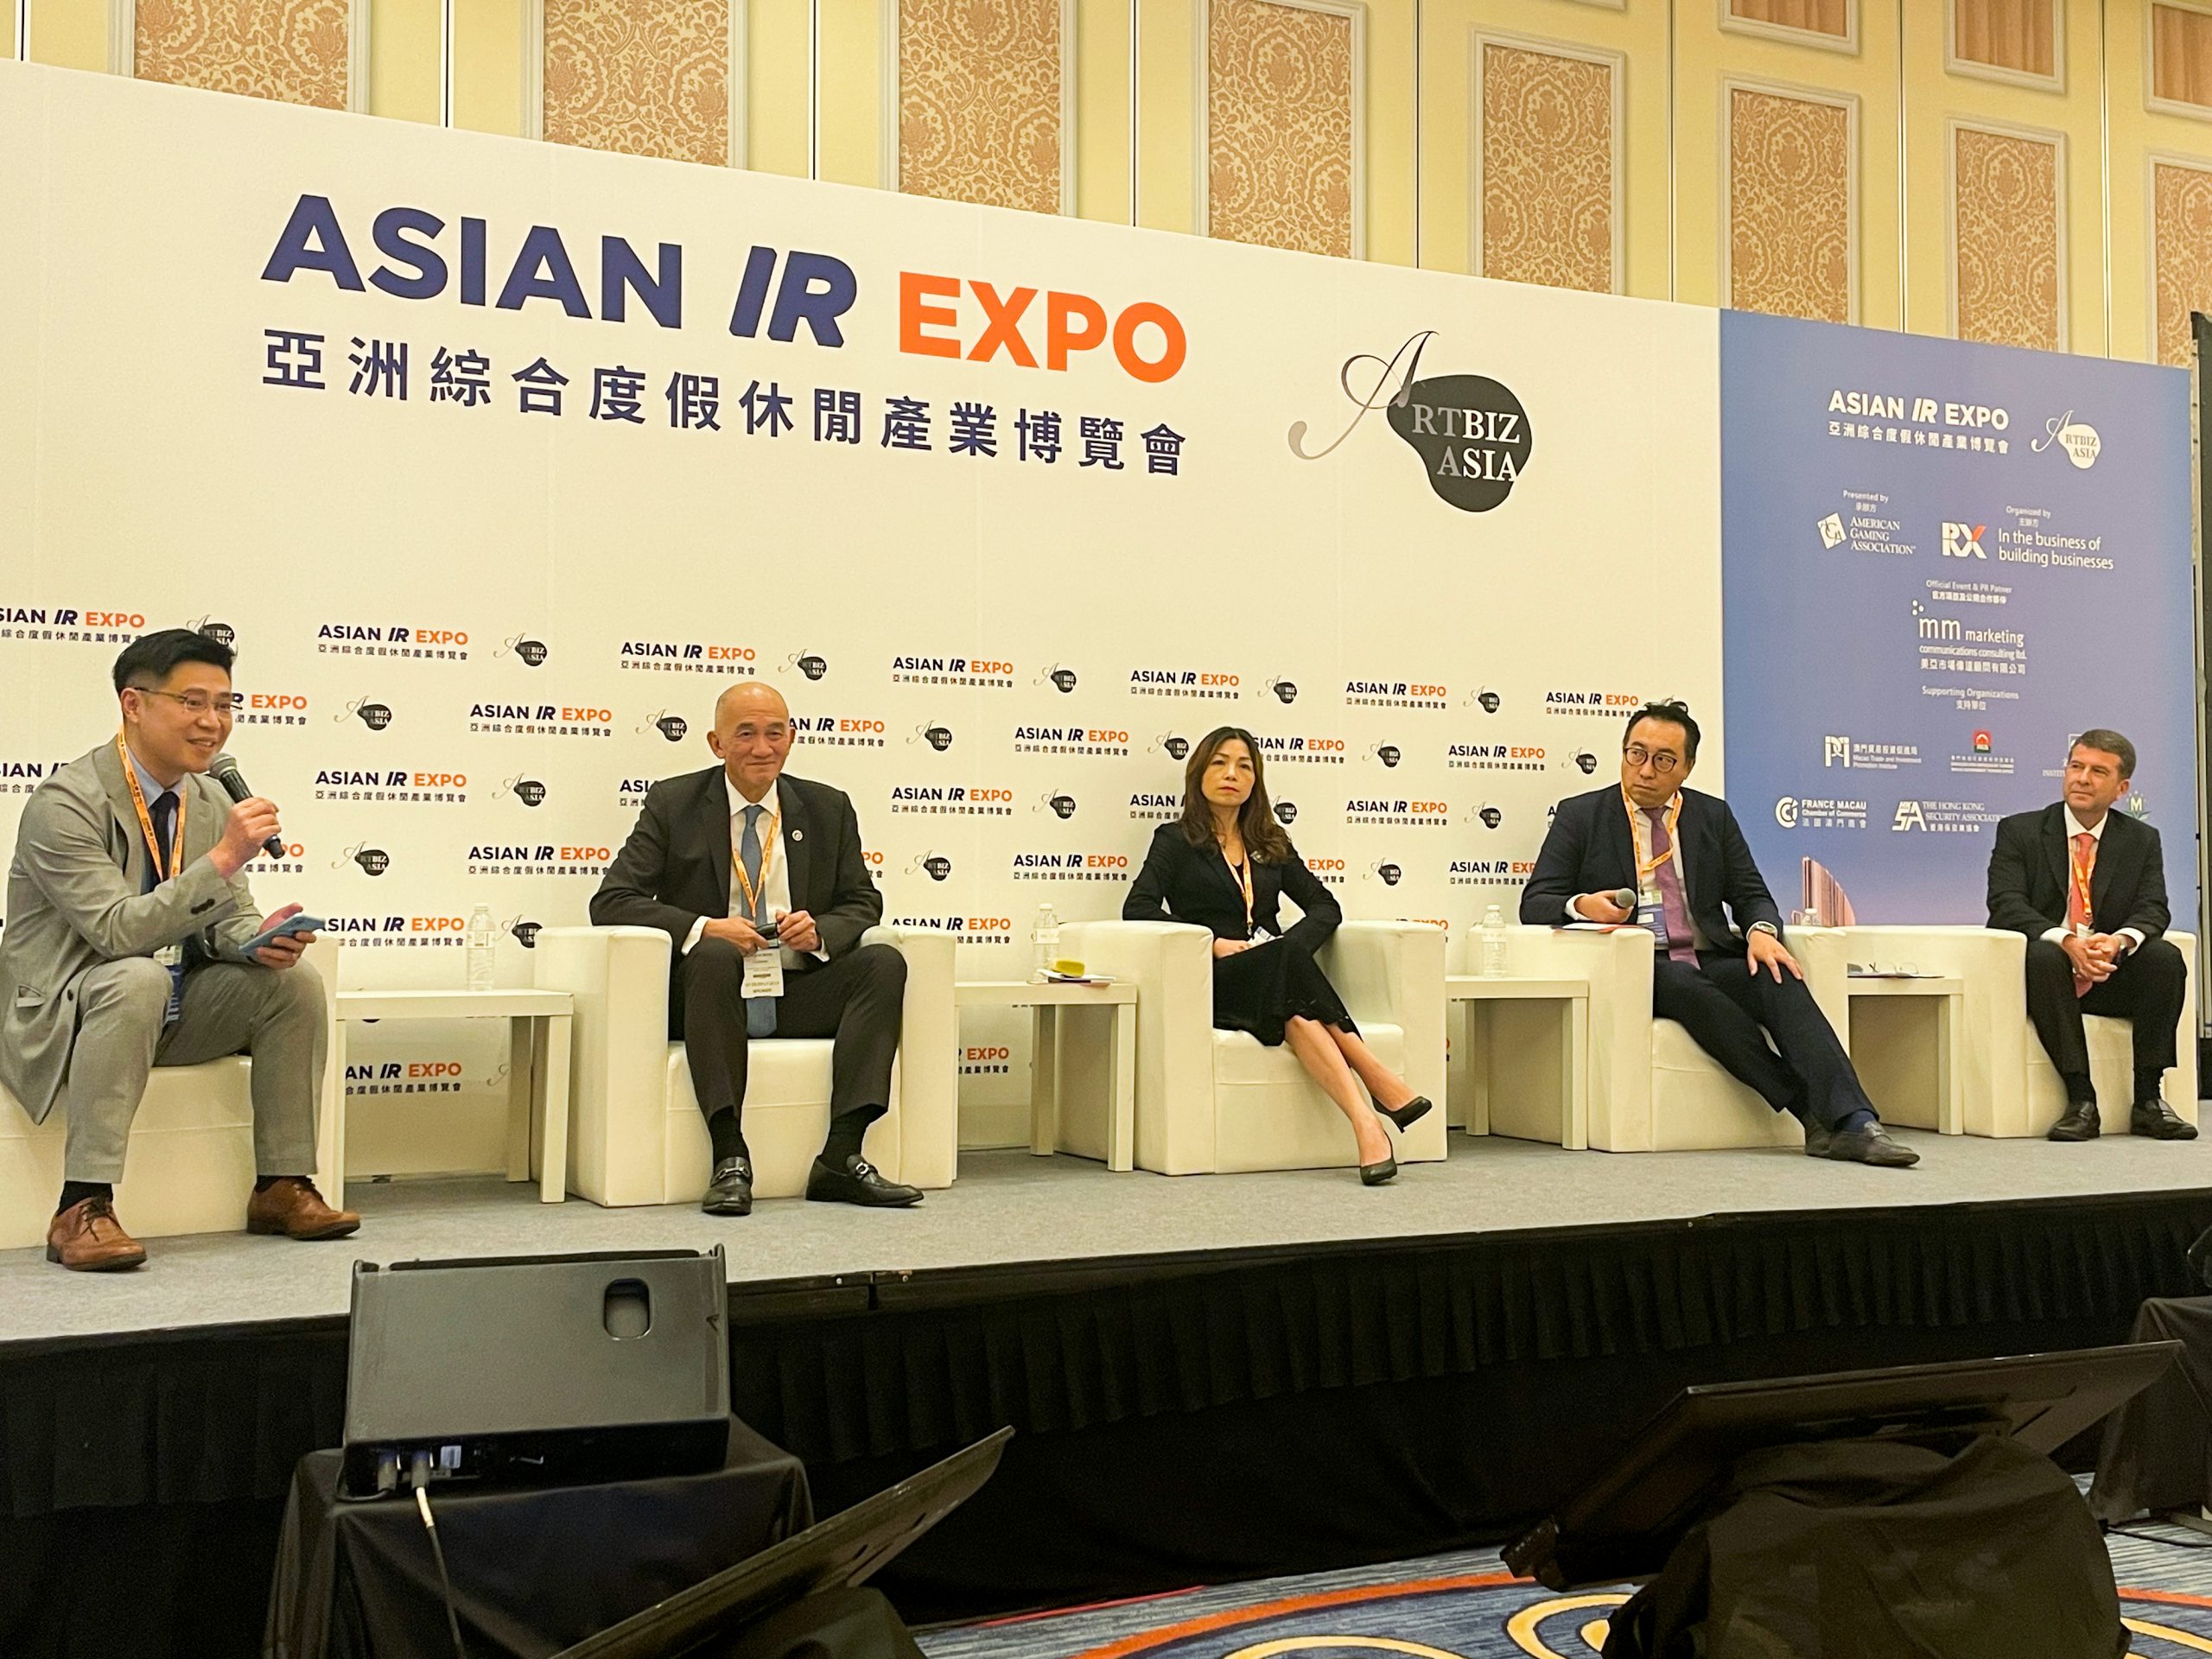 Speakers at G2E Asia explore a new era for Macao’s integrated resorts